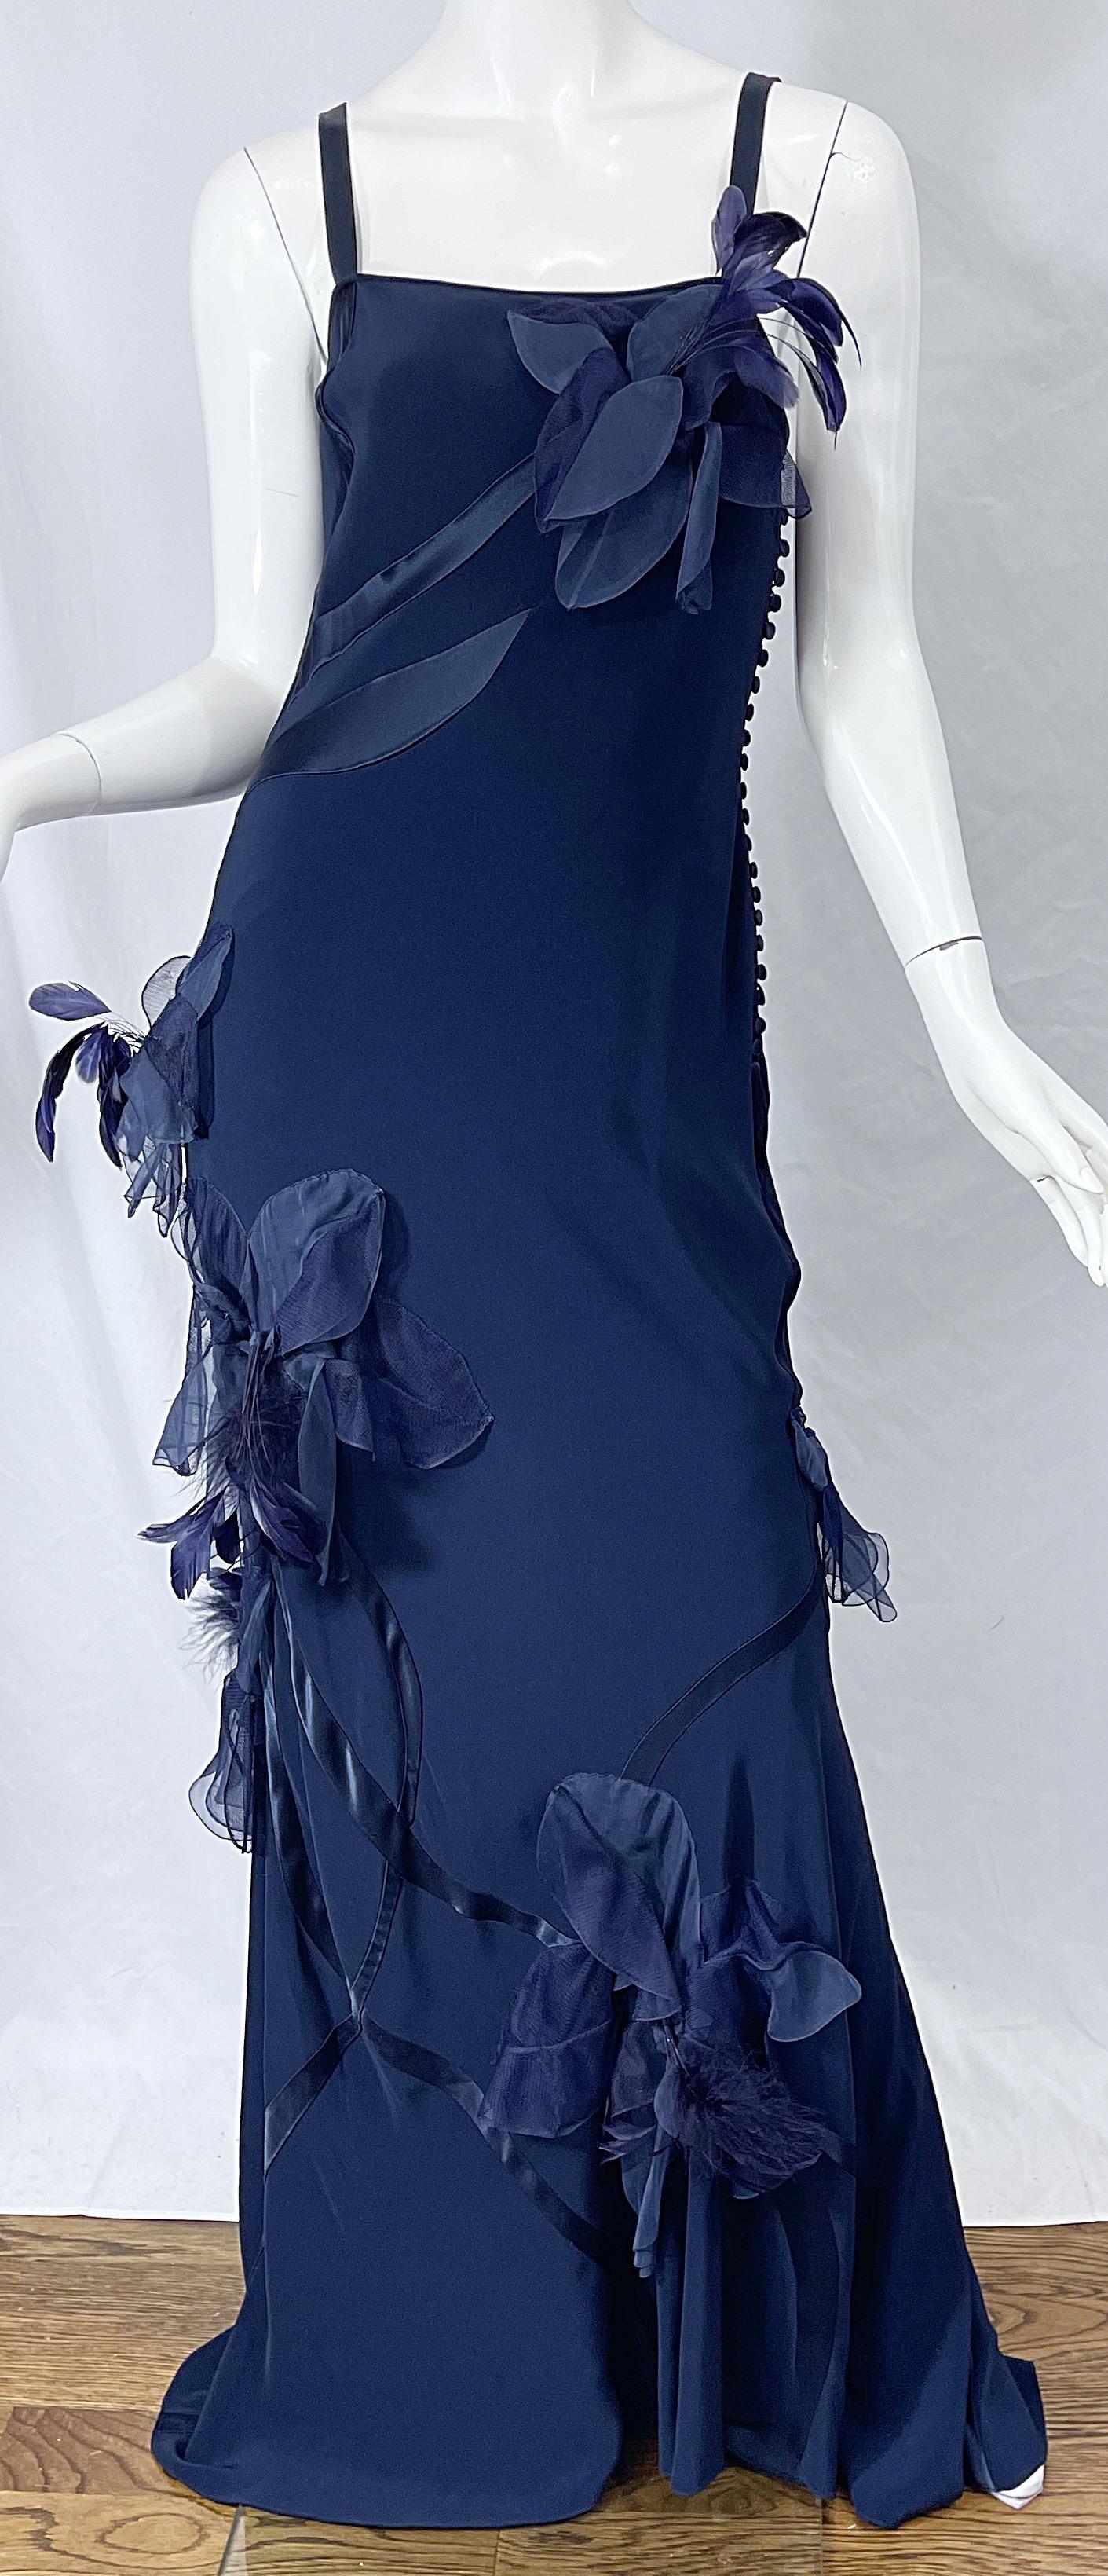 NWT John Galliano Size 10 Early 2000s Navy Blue Feather Silk / Satin Gown Dress 4